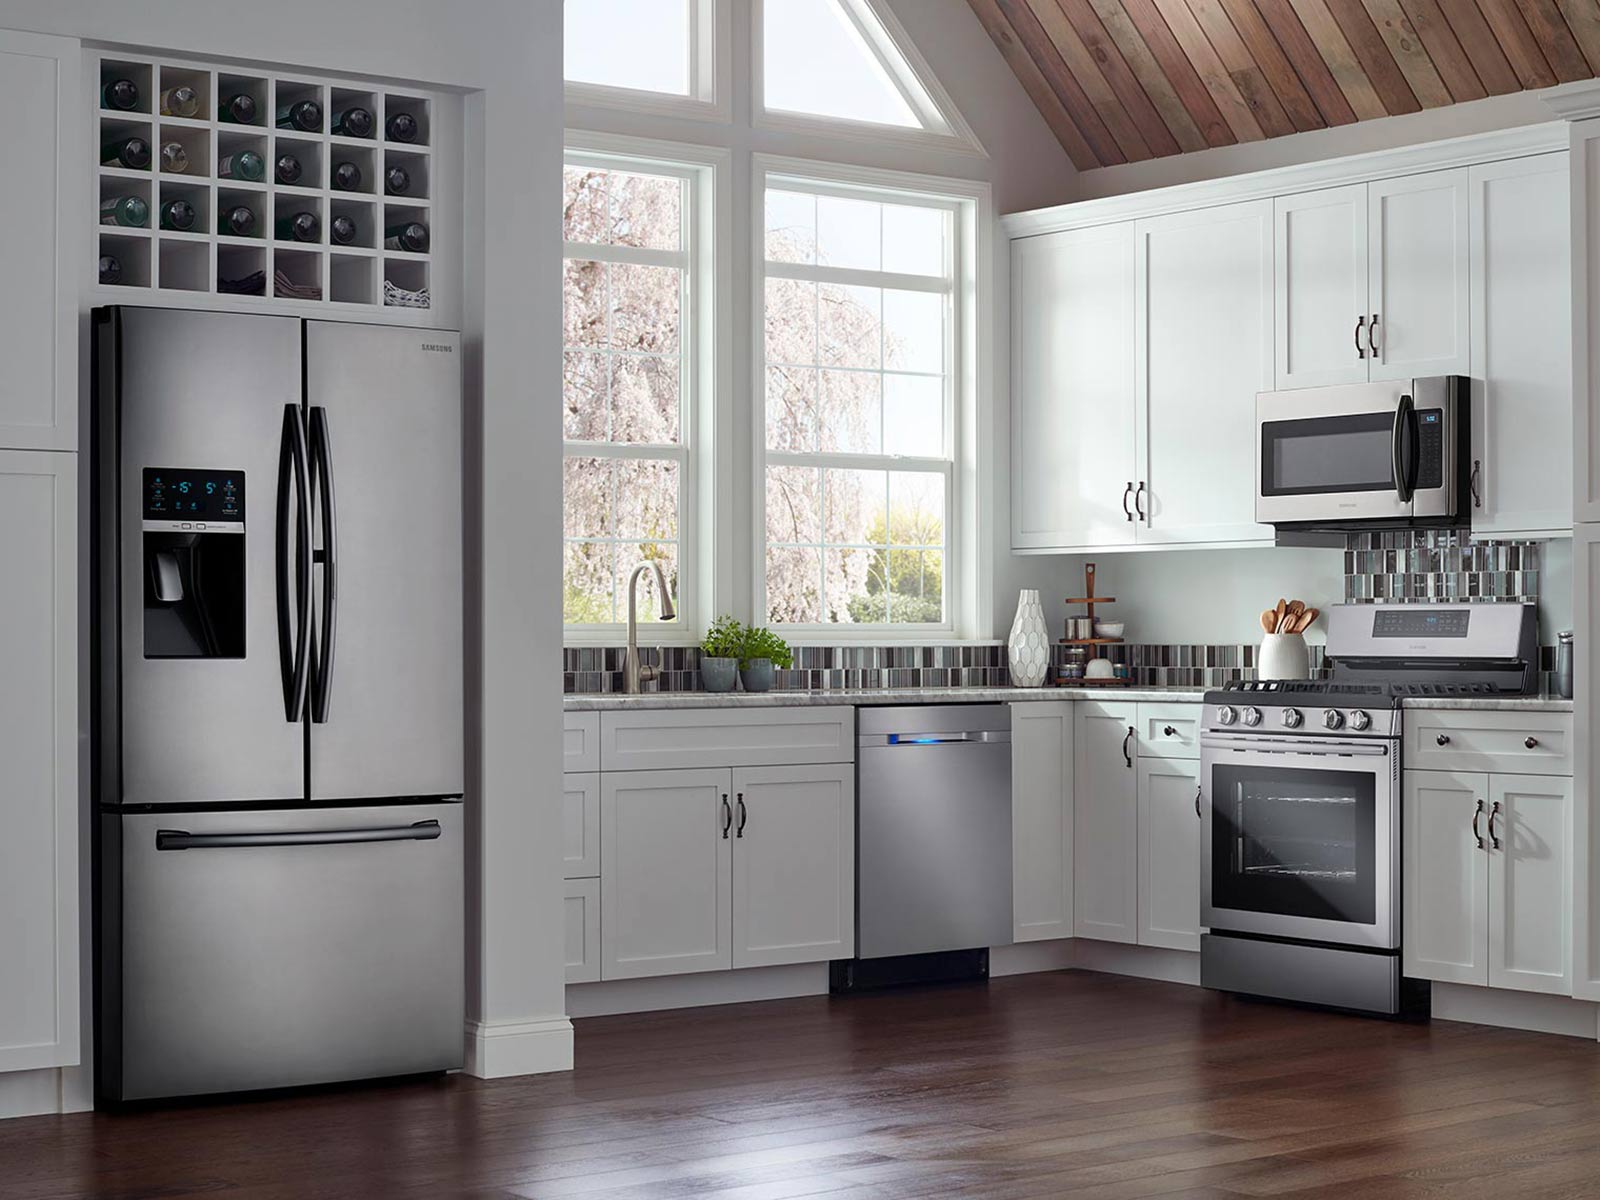 https://image-us.samsung.com/SamsungUS/home/home-appliances/refrigerators/french-doors/pdp/rf28hdedbsr/gallery/10_Refrigerator_French-Door_RF28HDEDBSR_Lifestyle_Kitchen-Closed_Silver_102417.jpg?$product-details-jpg$